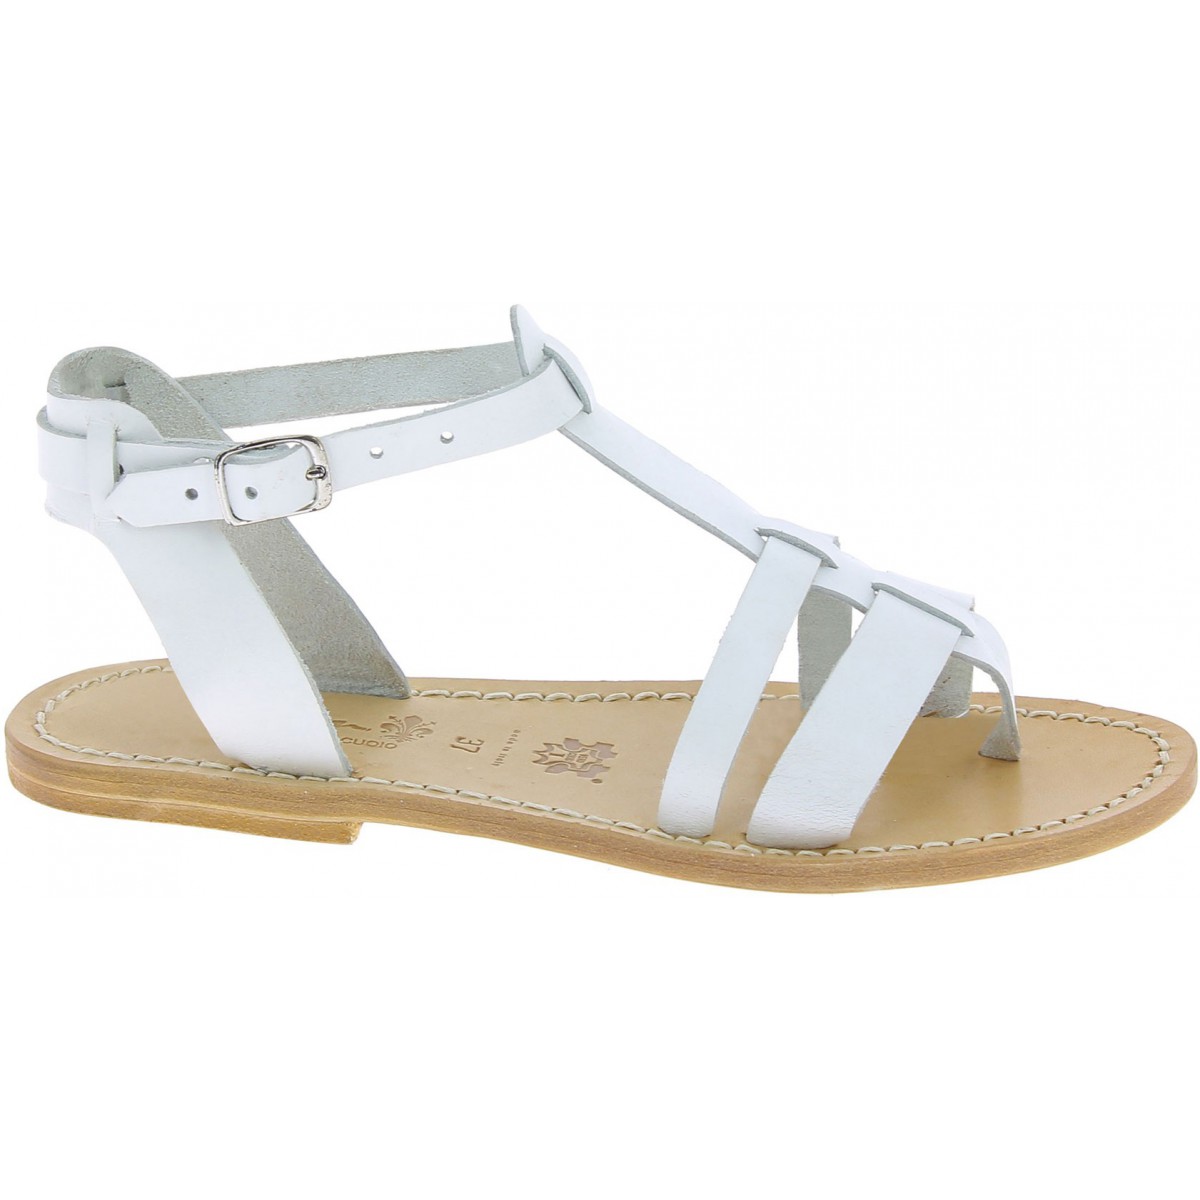 Women's flat white leather sandals Handmade in Italy | Gianluca - The ...